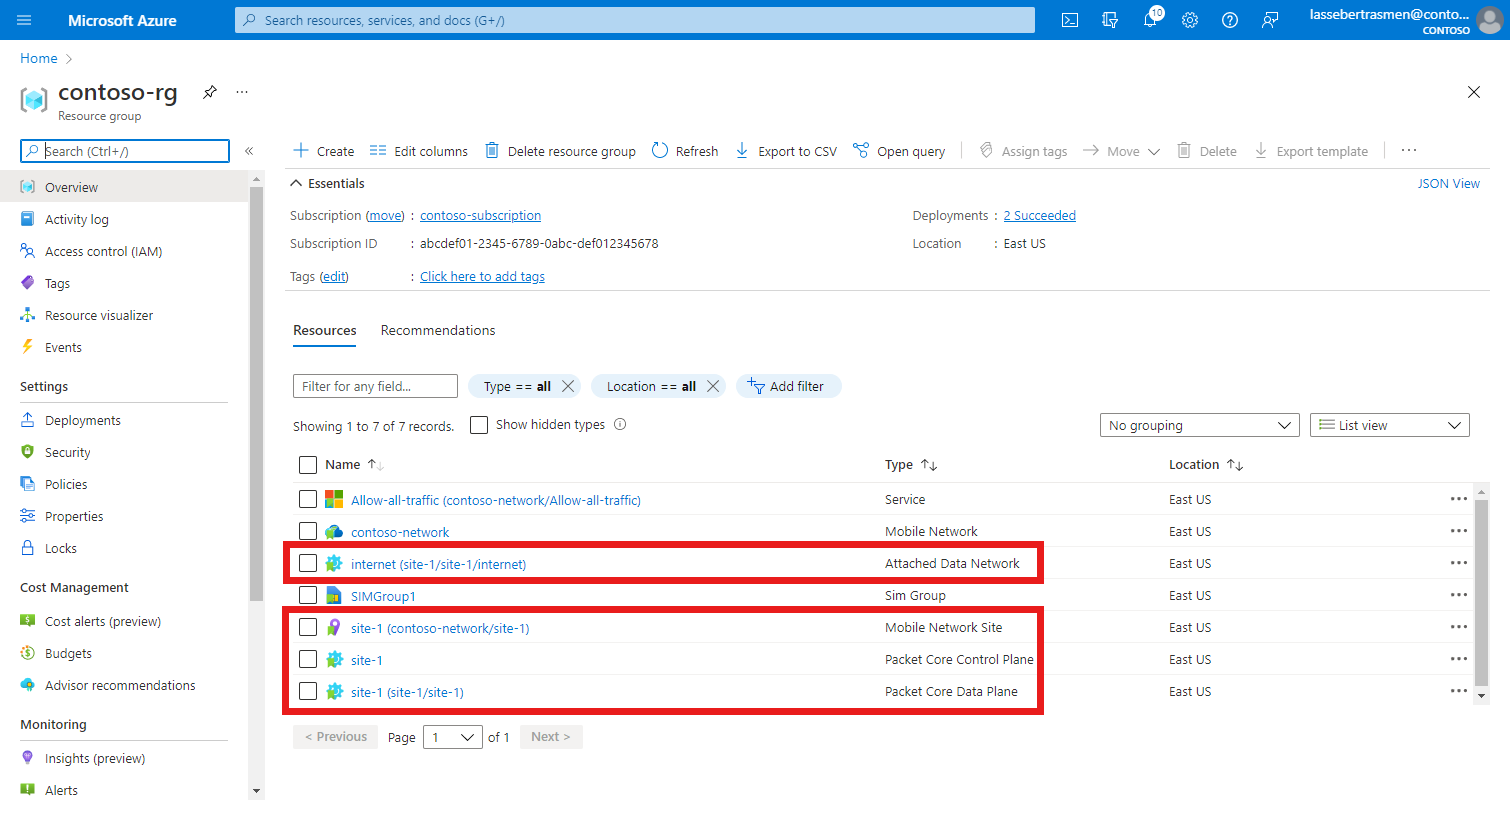 Screenshot of the Azure portal showing a resource group containing a site and its related resources.